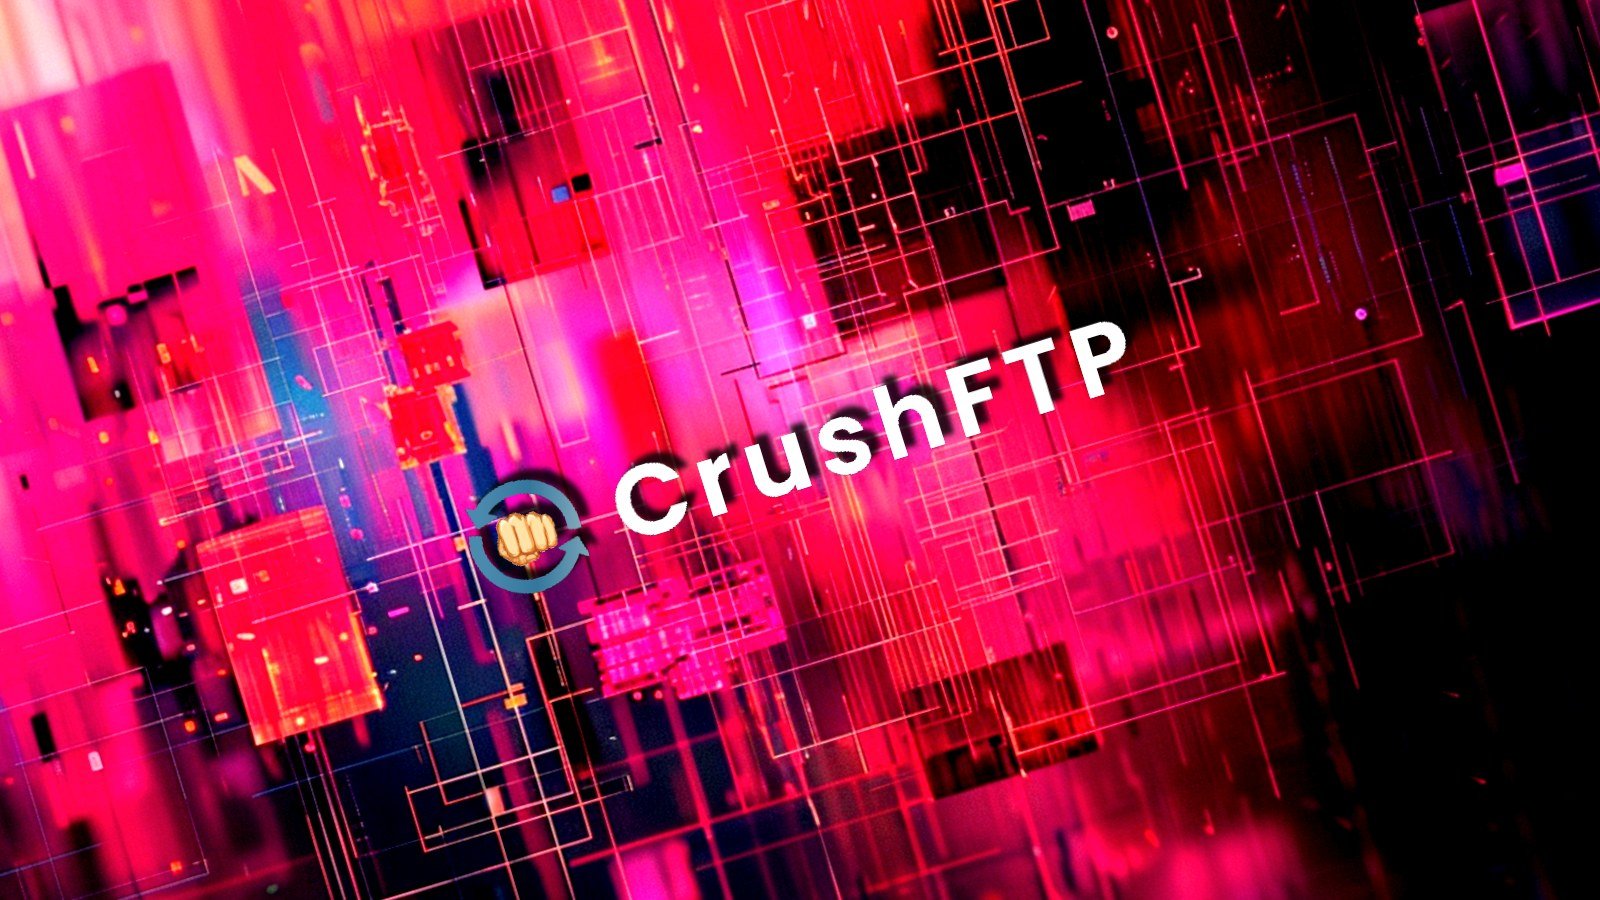 Over 1,400 CrushFTP servers vulnerable to actively exploited bug